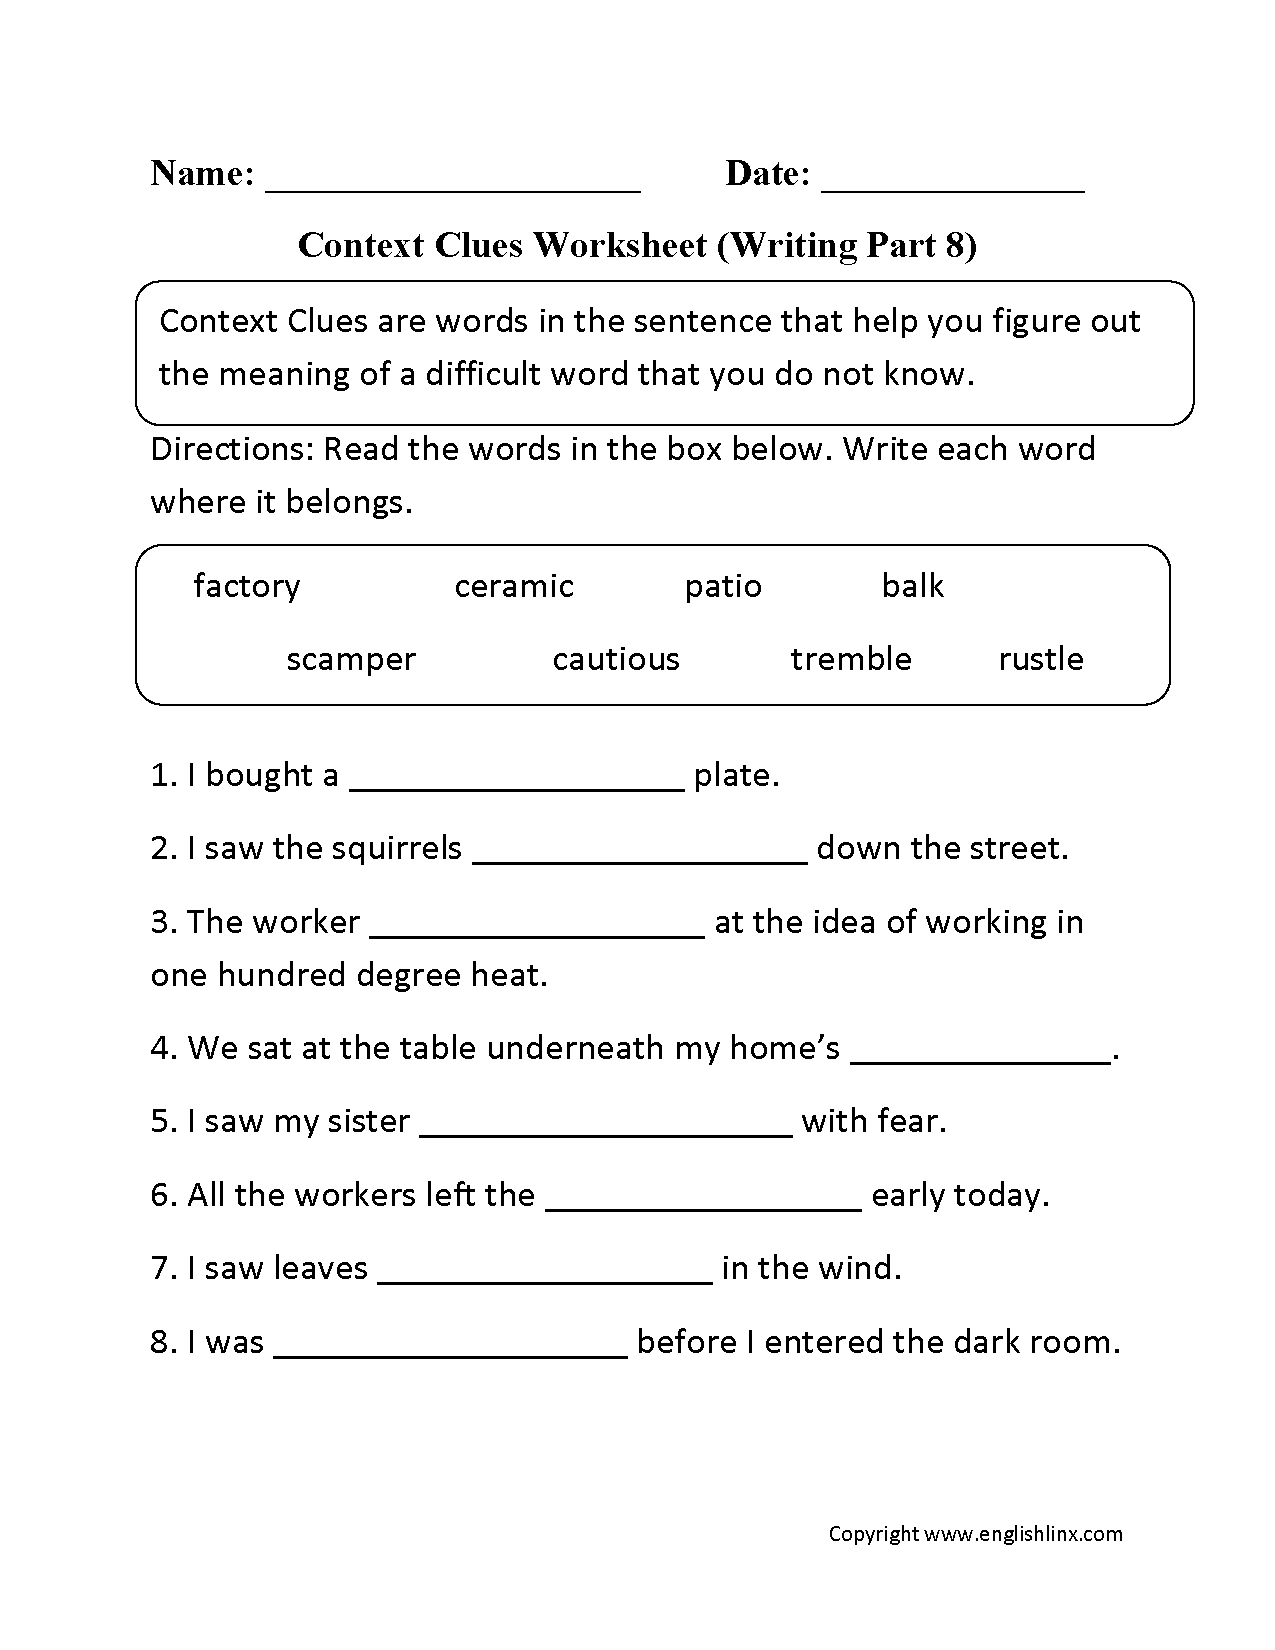 Context Clues Worksheet Writing Part 8 Intermediate | Reading Games | Context Clues Printable Worksheets 6Th Grade